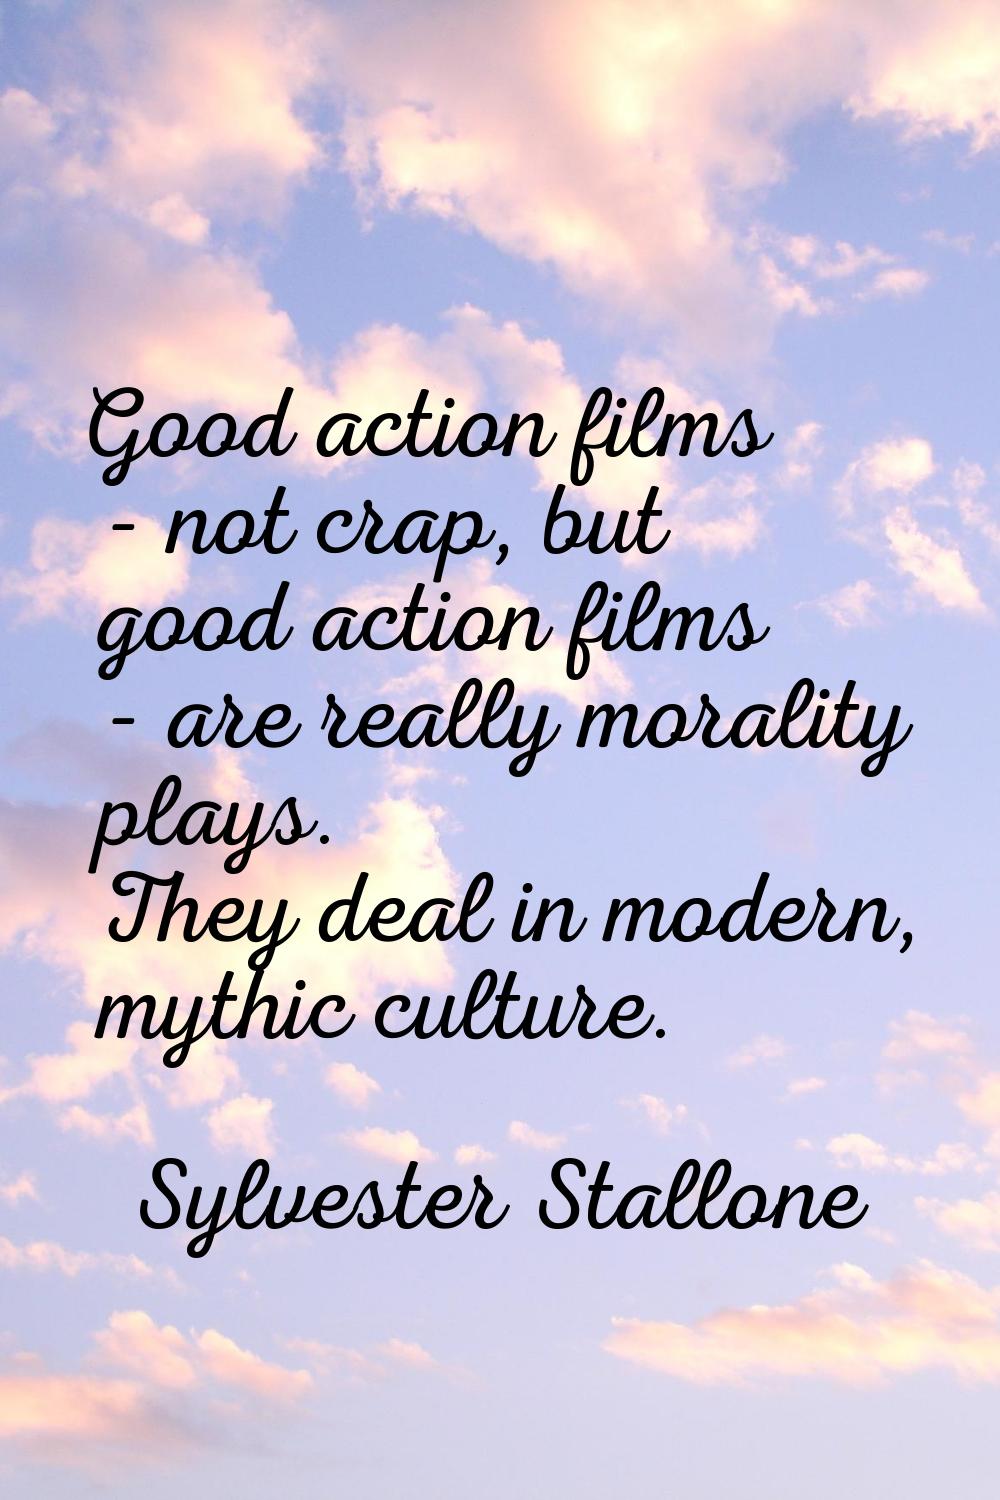 Good action films - not crap, but good action films - are really morality plays. They deal in moder